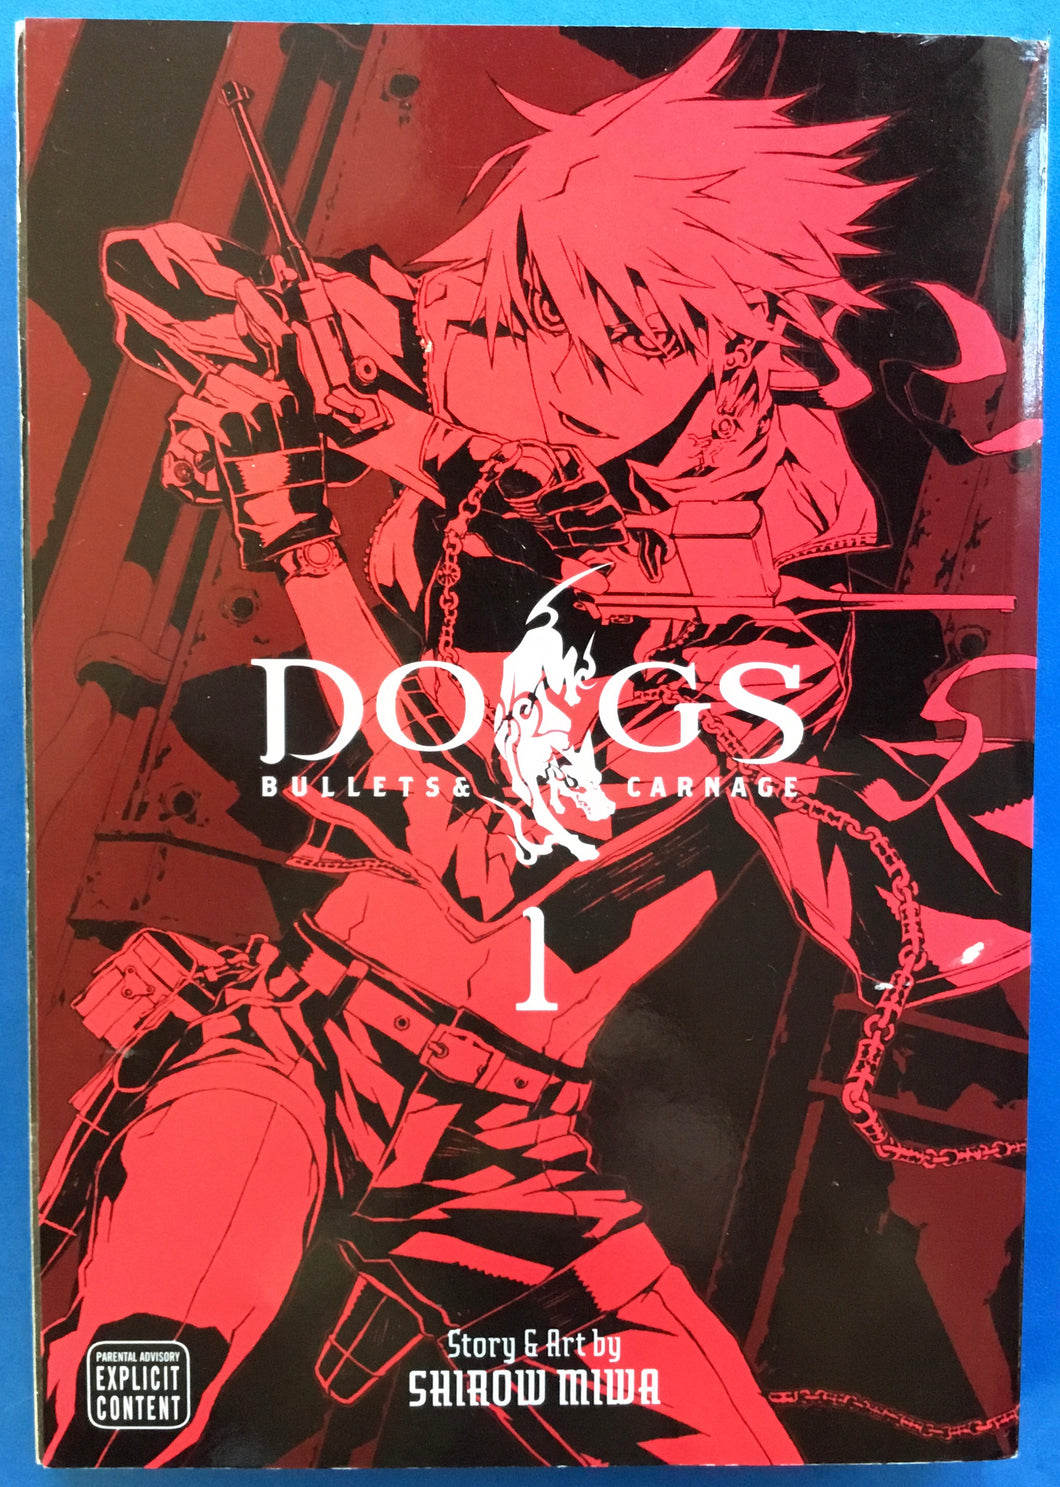 Dogs: Bullets & Carnage Volume 1 by Shirow Miwa 2009